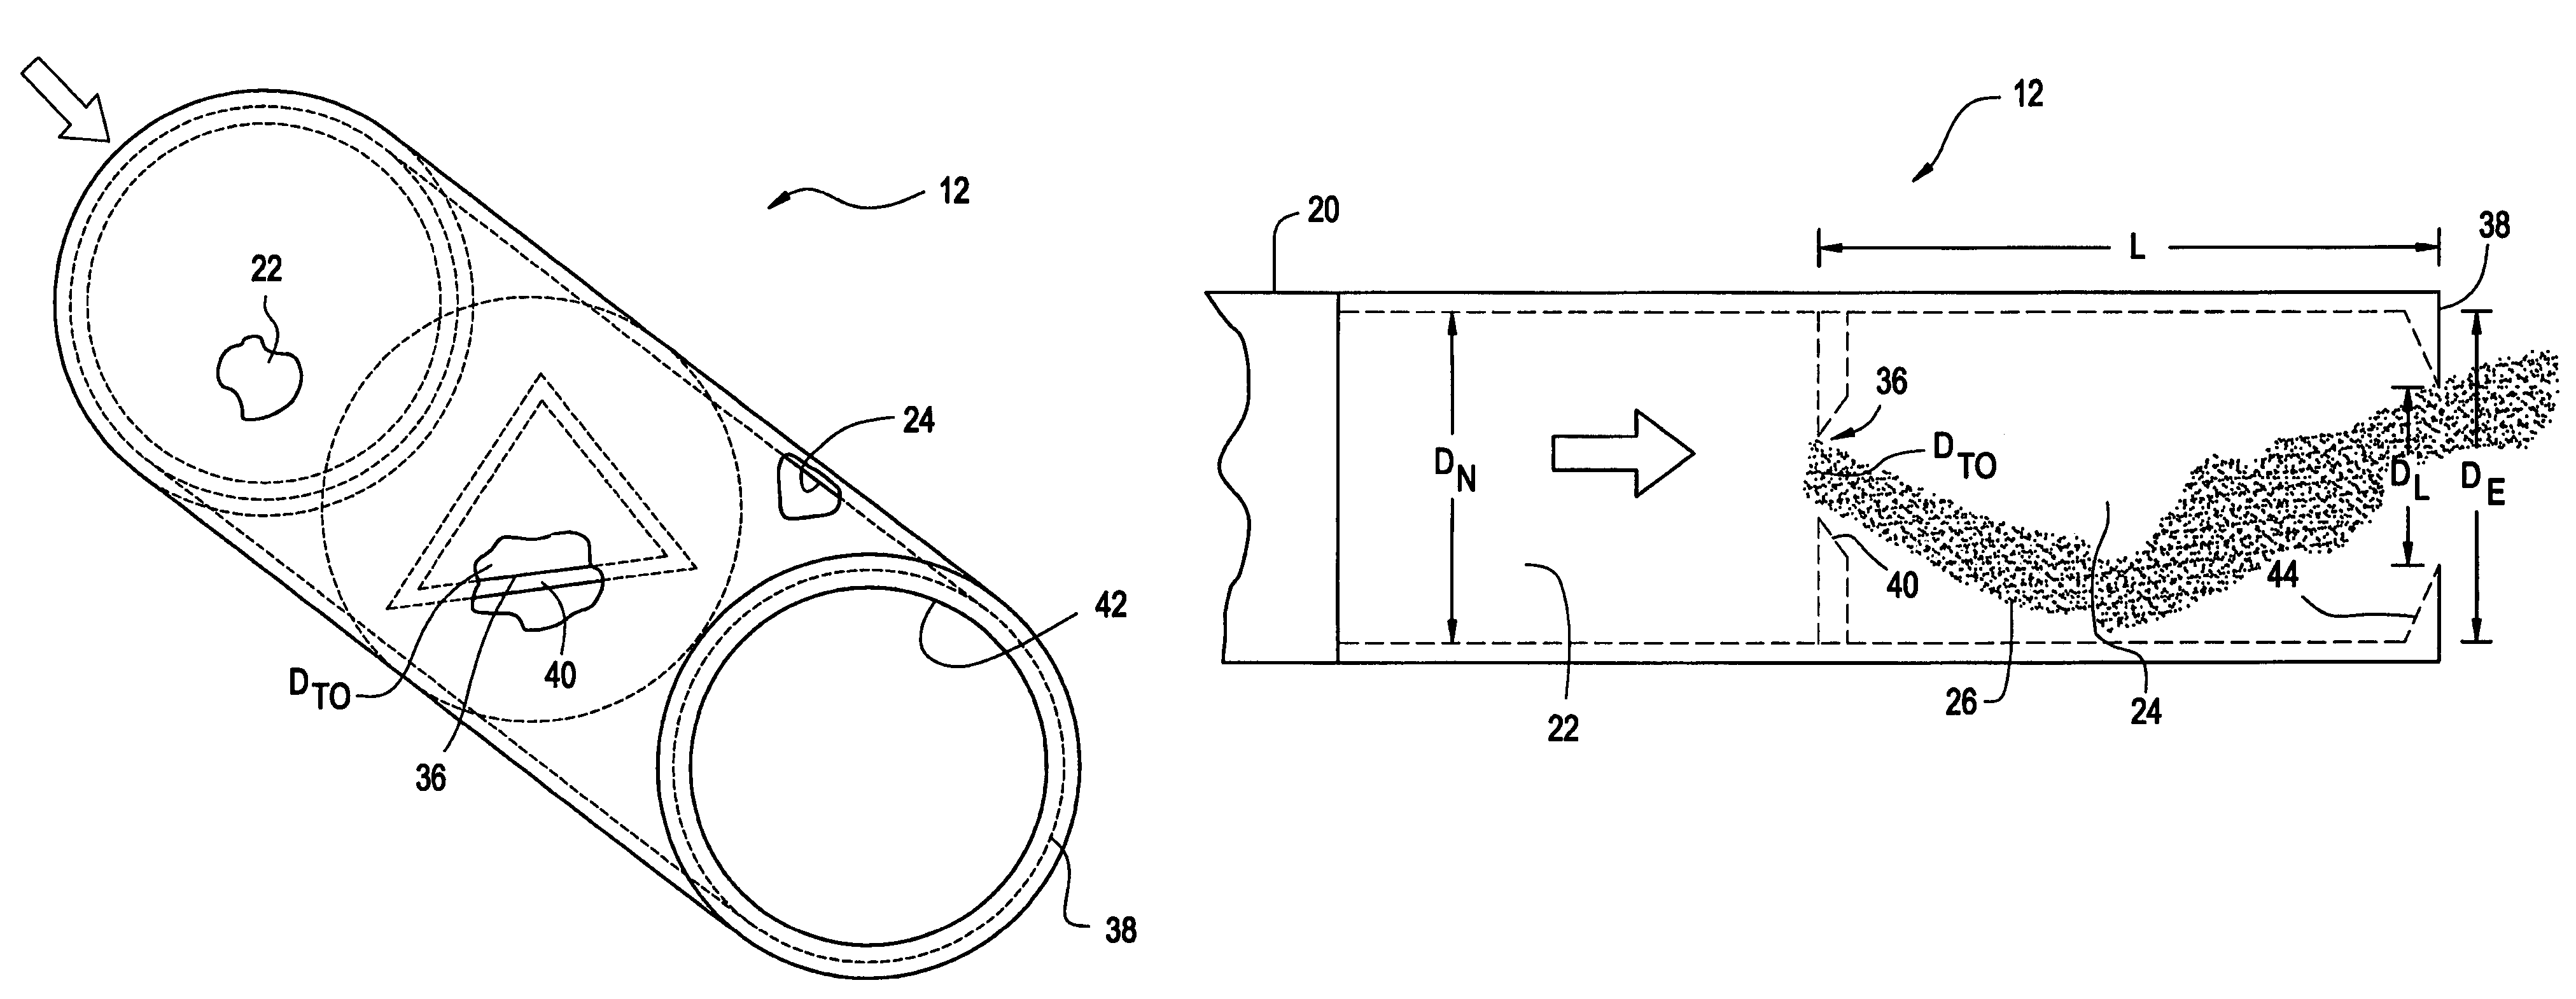 Device for reducing jet engine exhaust noise using oscillating jets